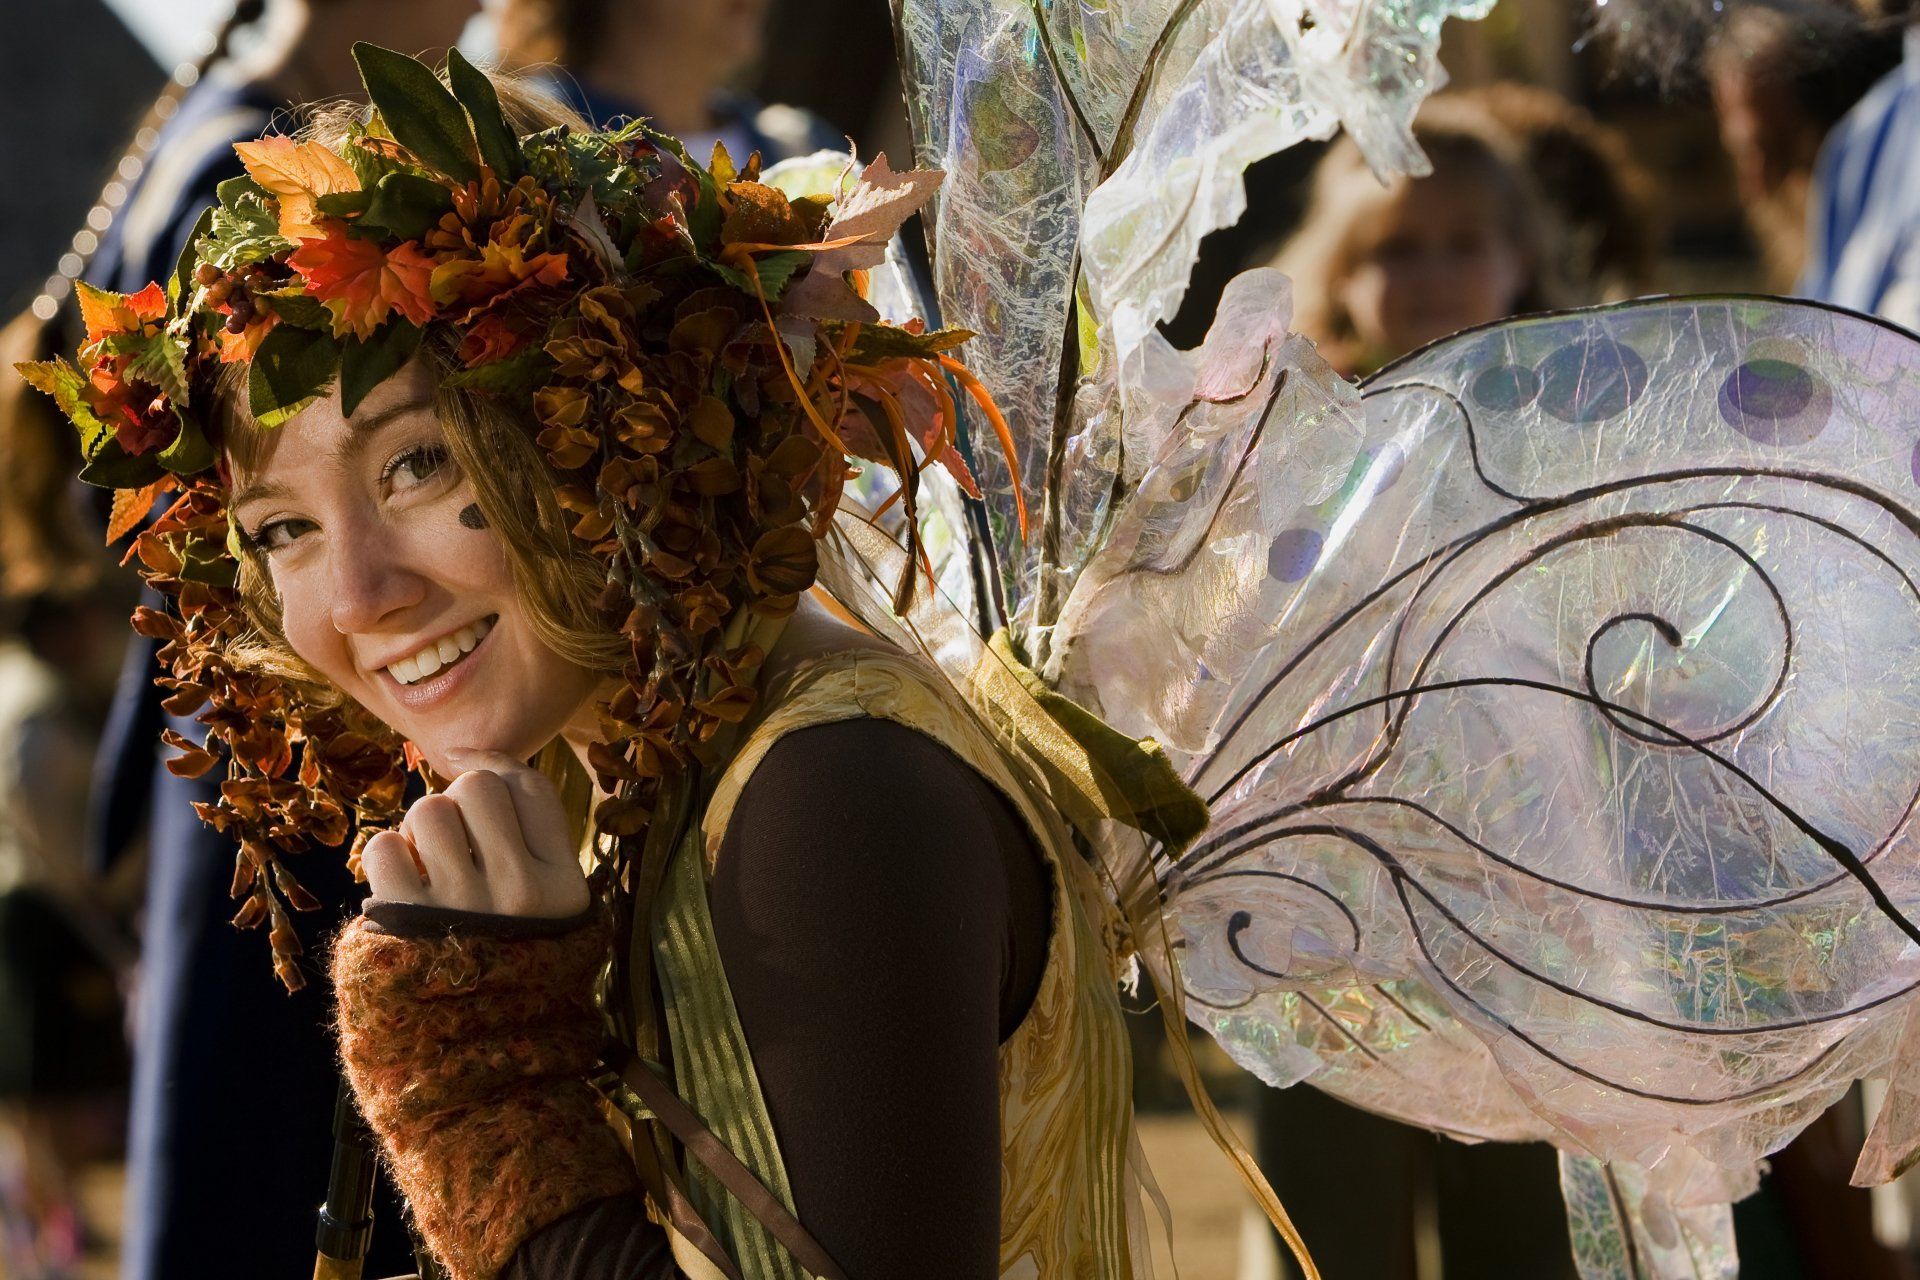 A woman in costume with butterfly wings at a festival